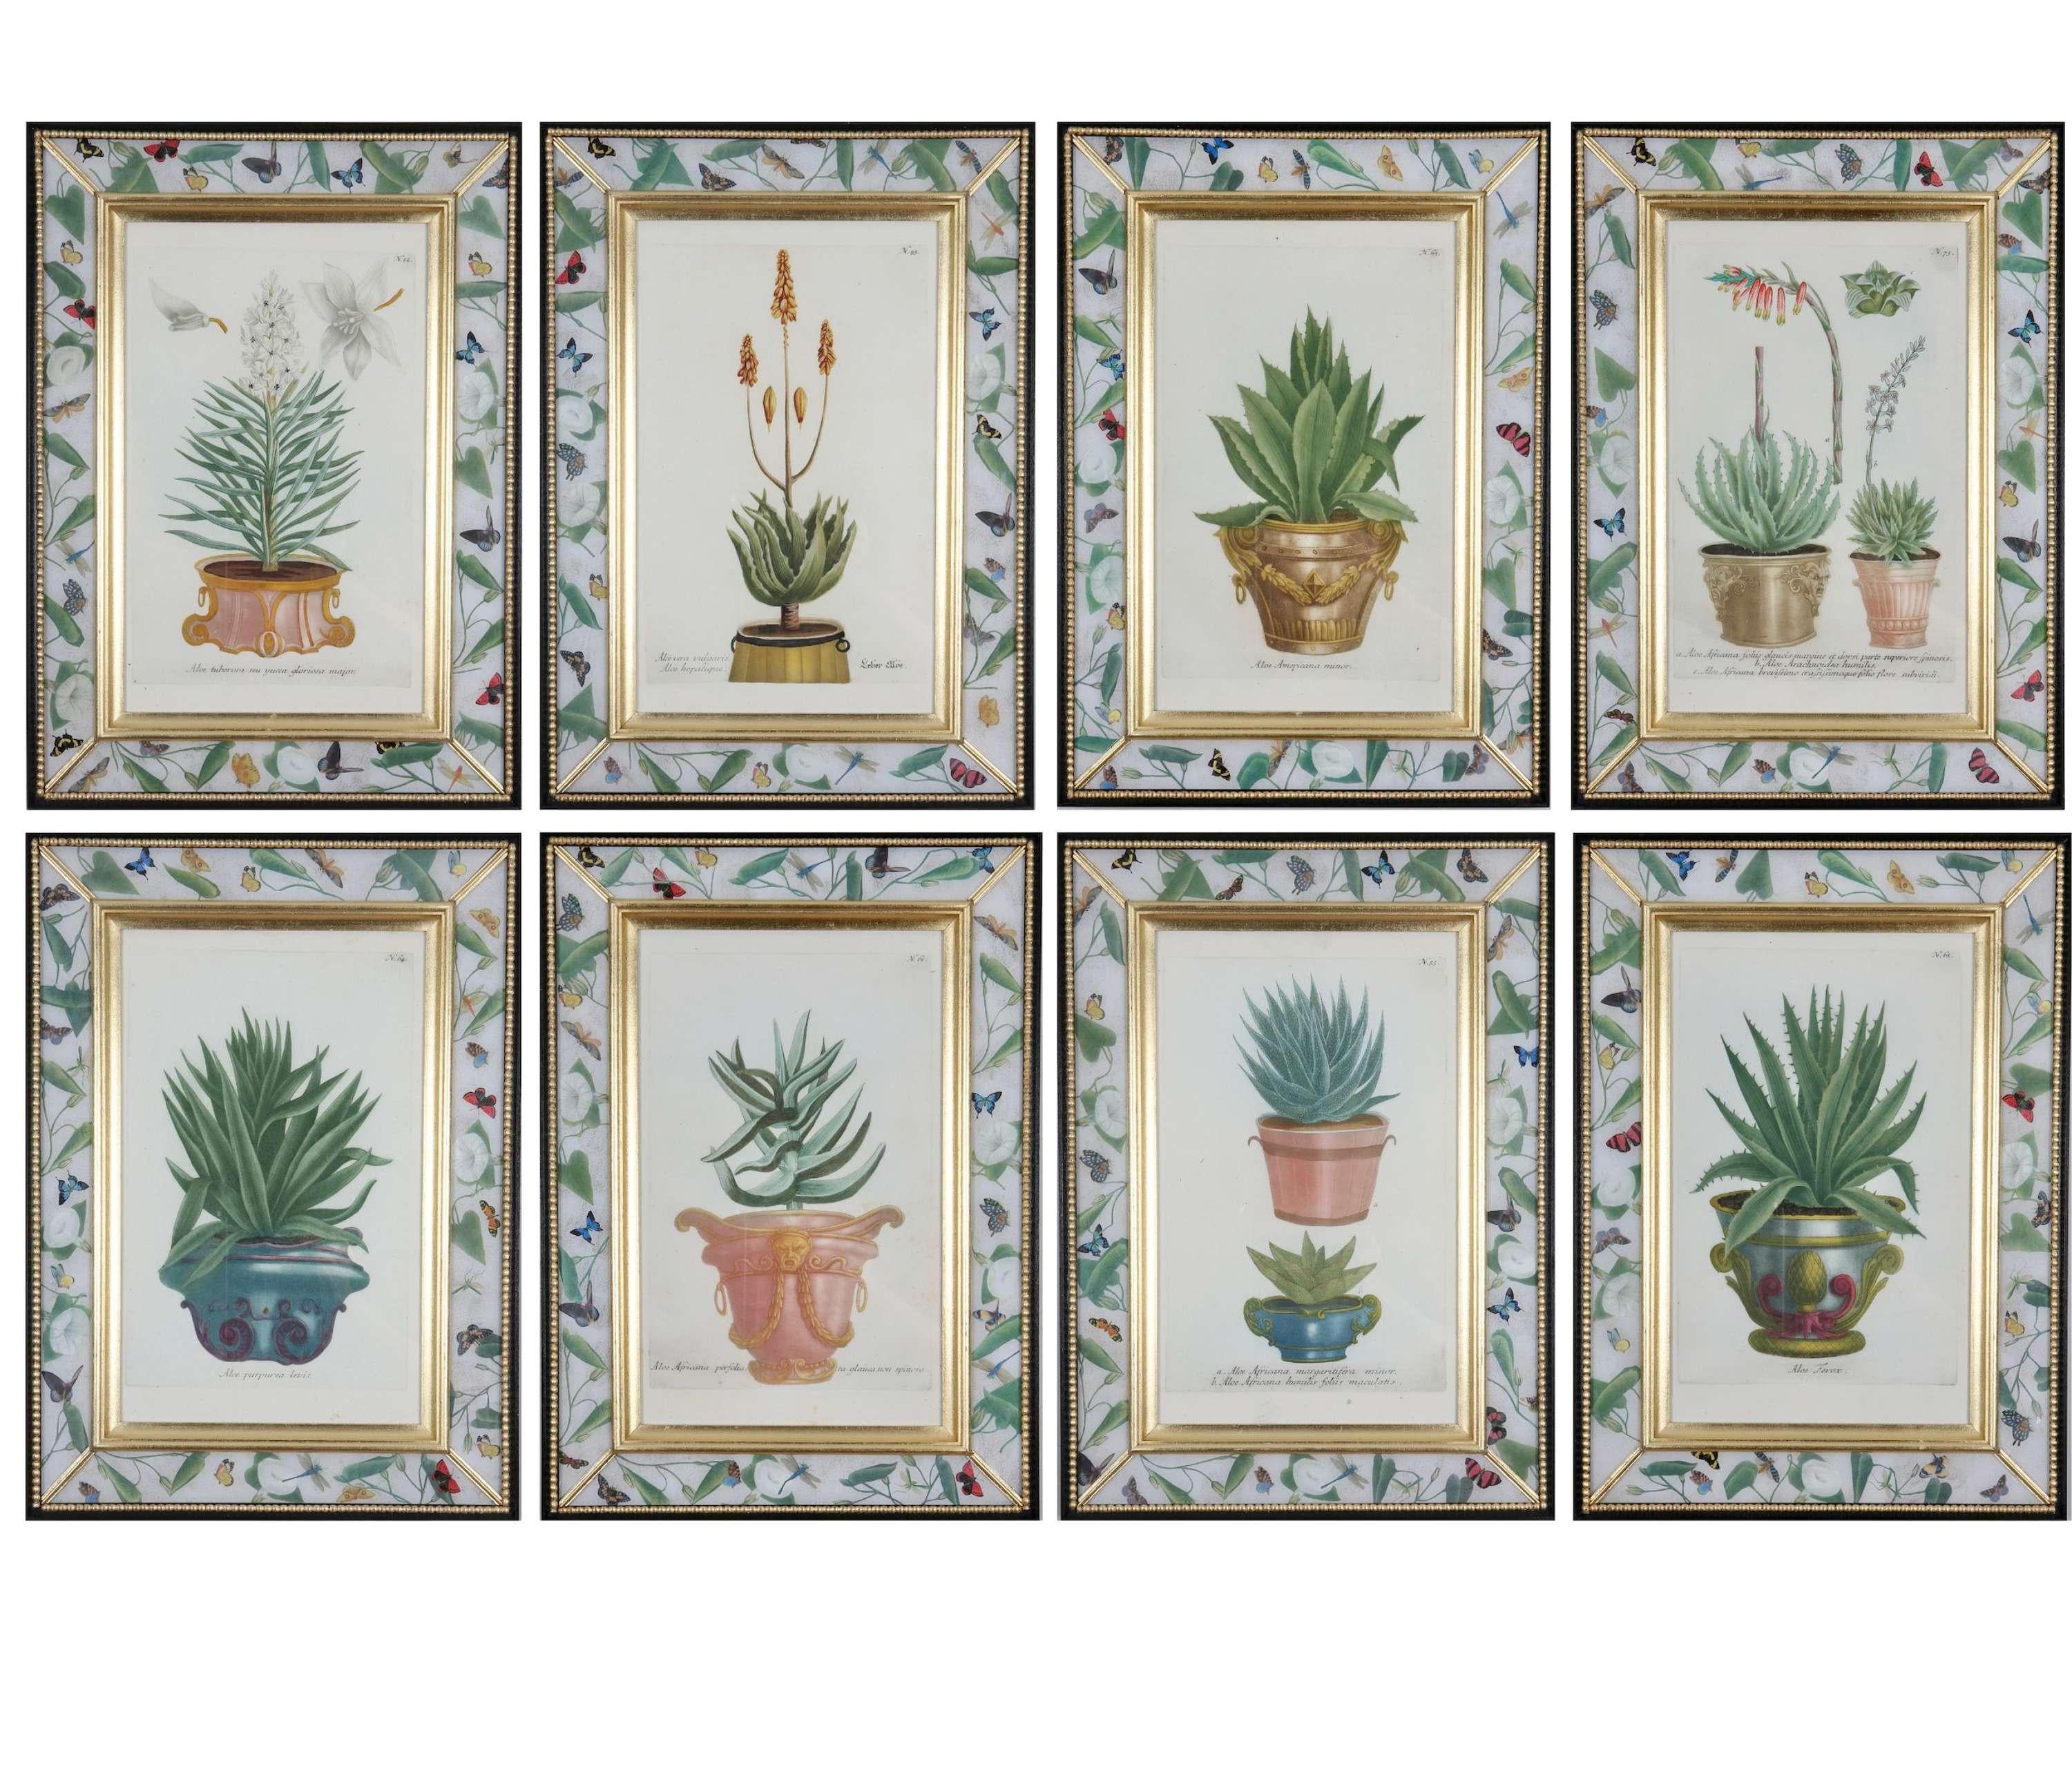 Hand-coloured mezzotint engravings of decorative urns with aloes and cacti from: 